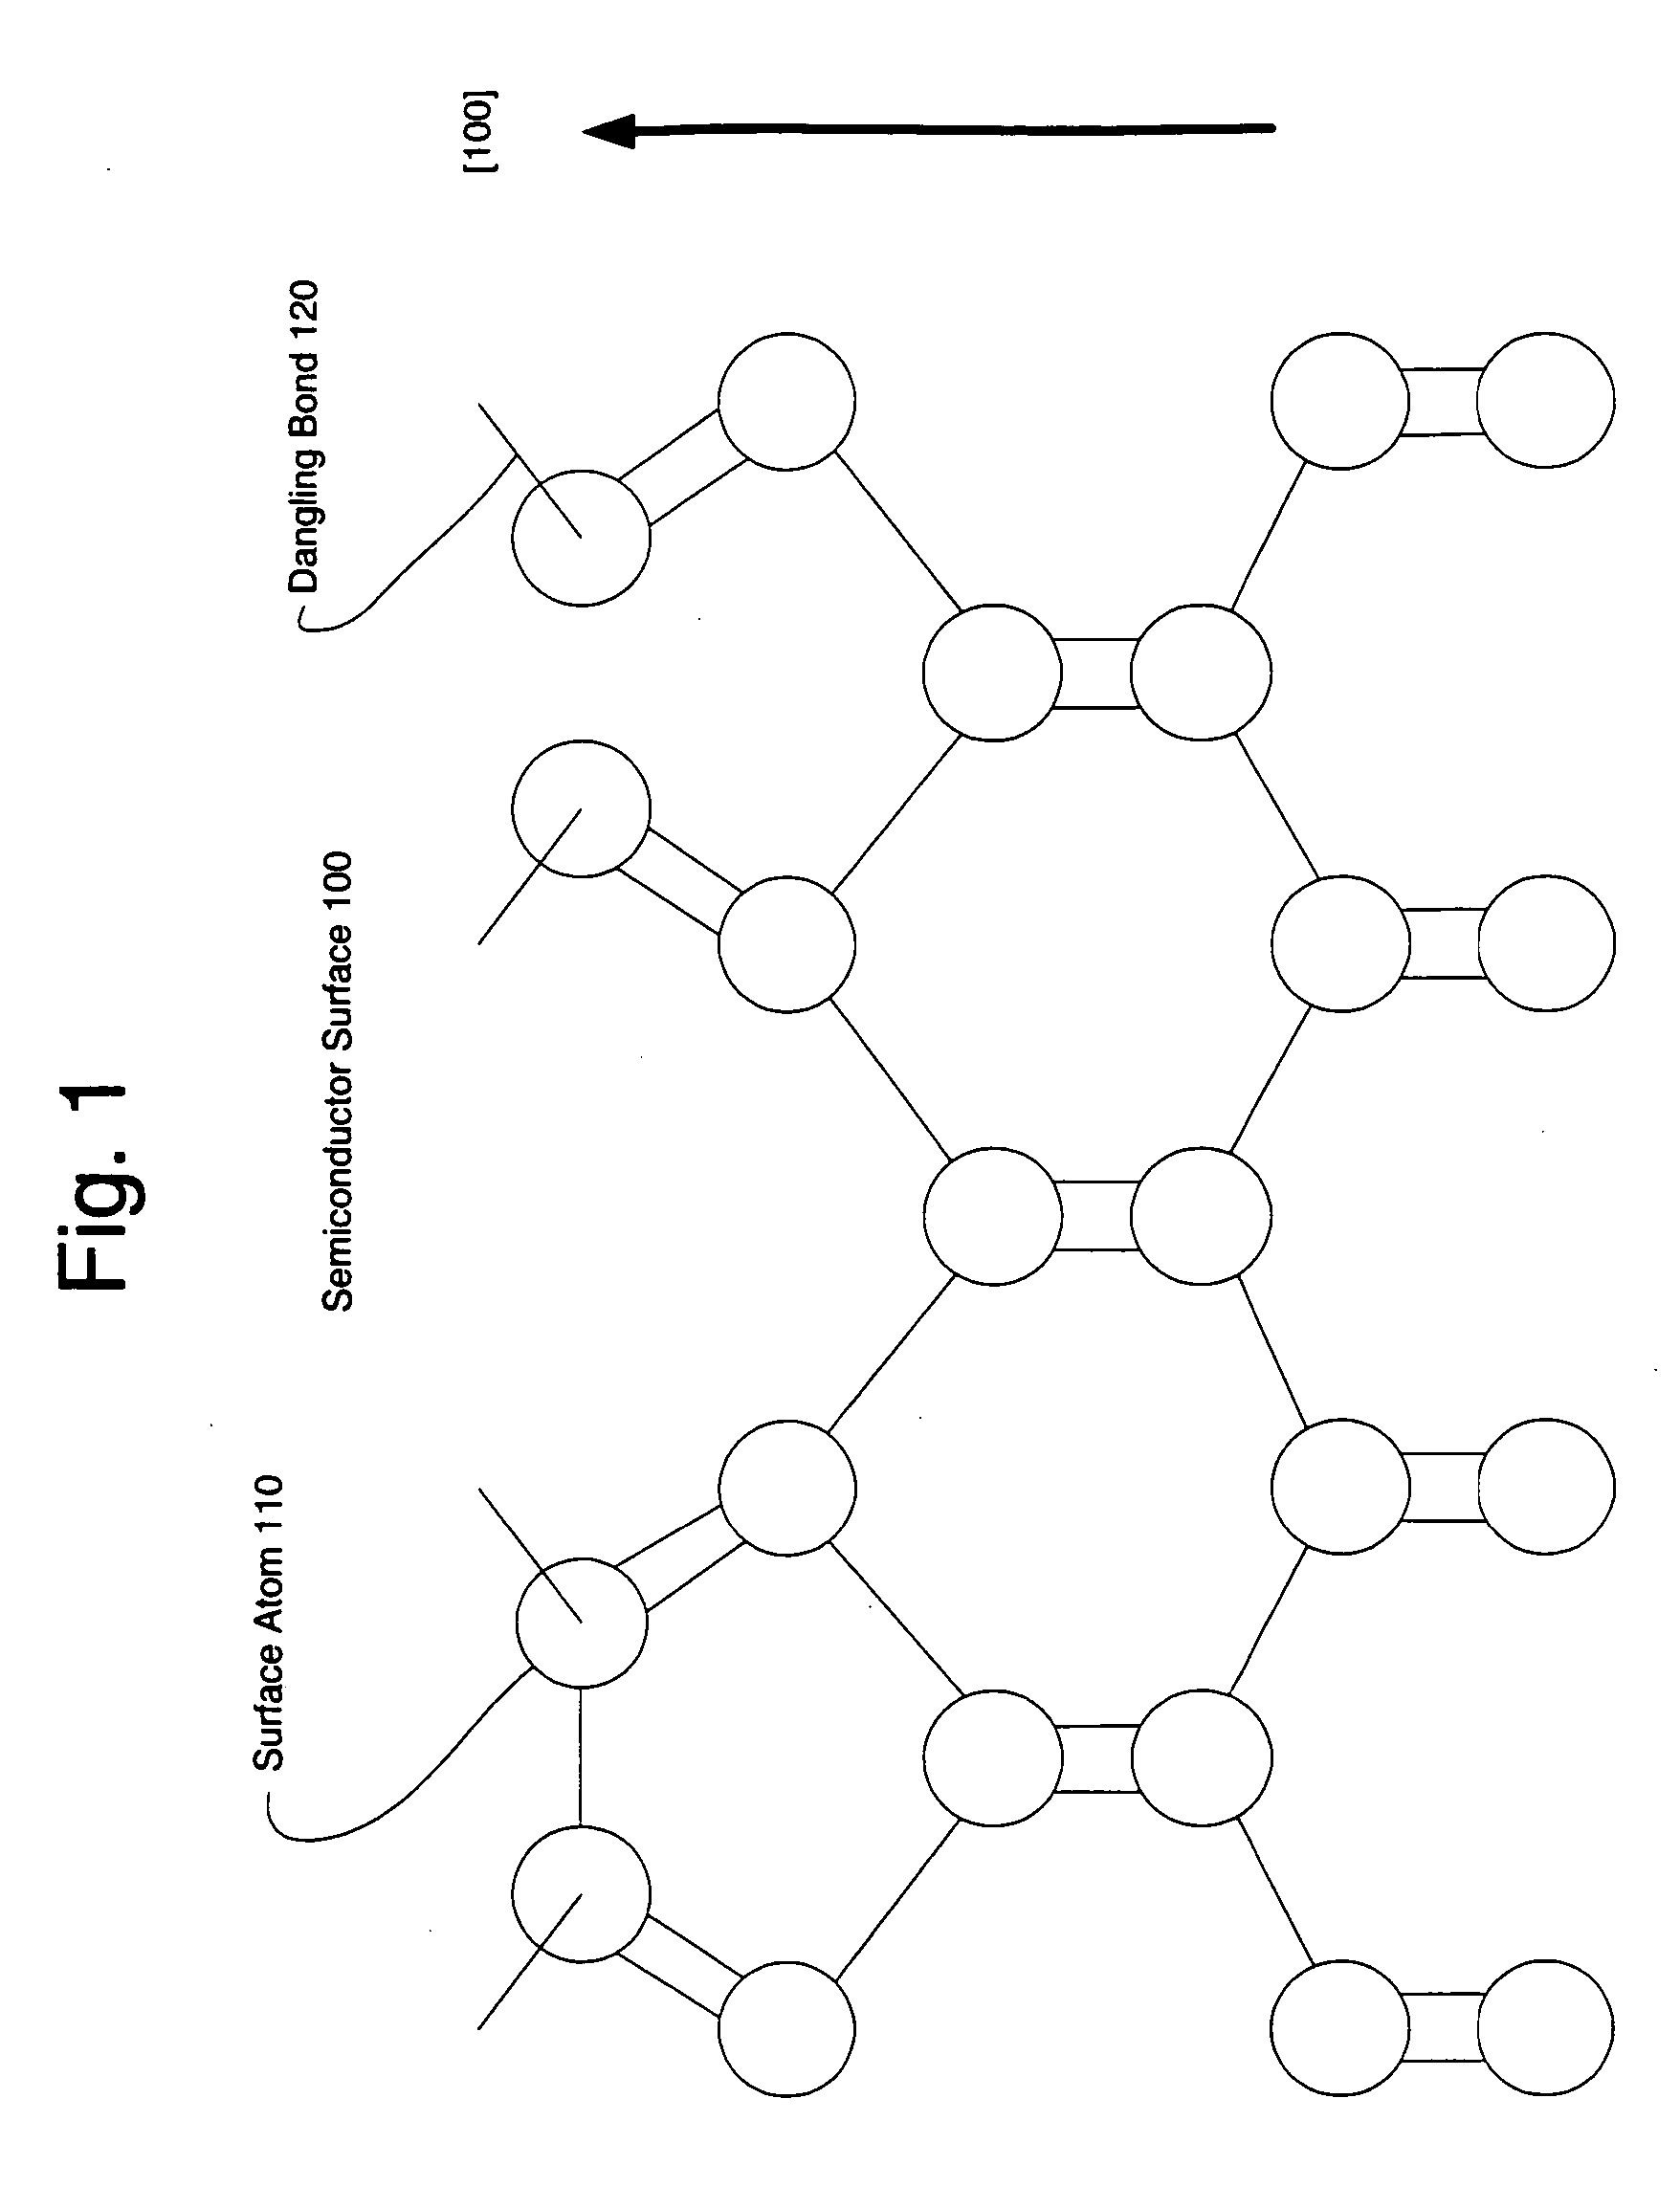 Method for depinning the fermi level of a semiconductor at an electrical junction and devices incorporating such junctions